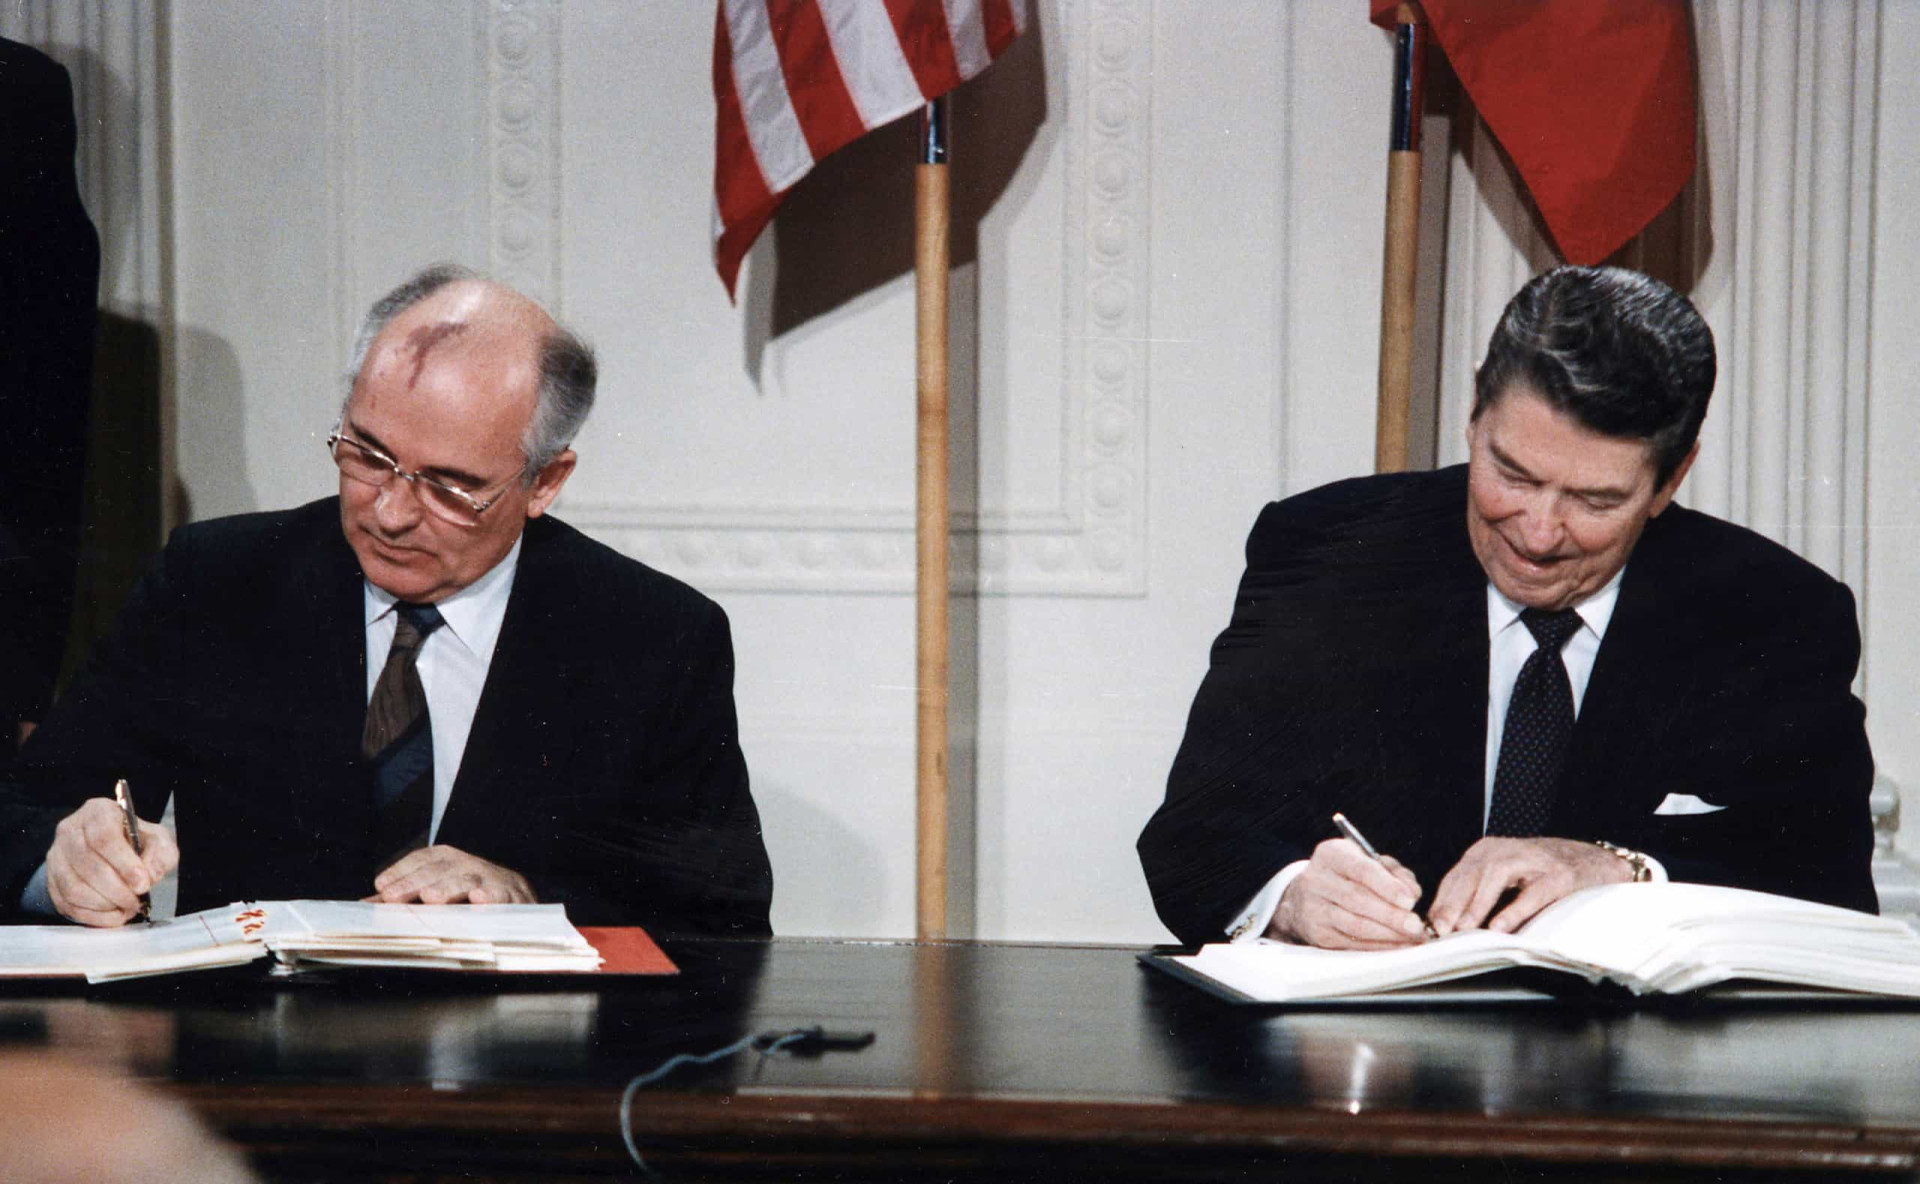 <p>A thaw in the Cold War sees the clock gain three minutes as Ronald Reagan and Mikhail Gorbachev sign the Intermediate-Range Nuclear Forces Treaty in Washington, D.C. on December 8, 1987, effective June 1, 1988.</p><p>You may also like:<a href="https://www.starsinsider.com/n/399001?utm_source=msn.com&utm_medium=display&utm_campaign=referral_description&utm_content=490923v3en-au"> Facts about the world's most-hated jobs </a></p>